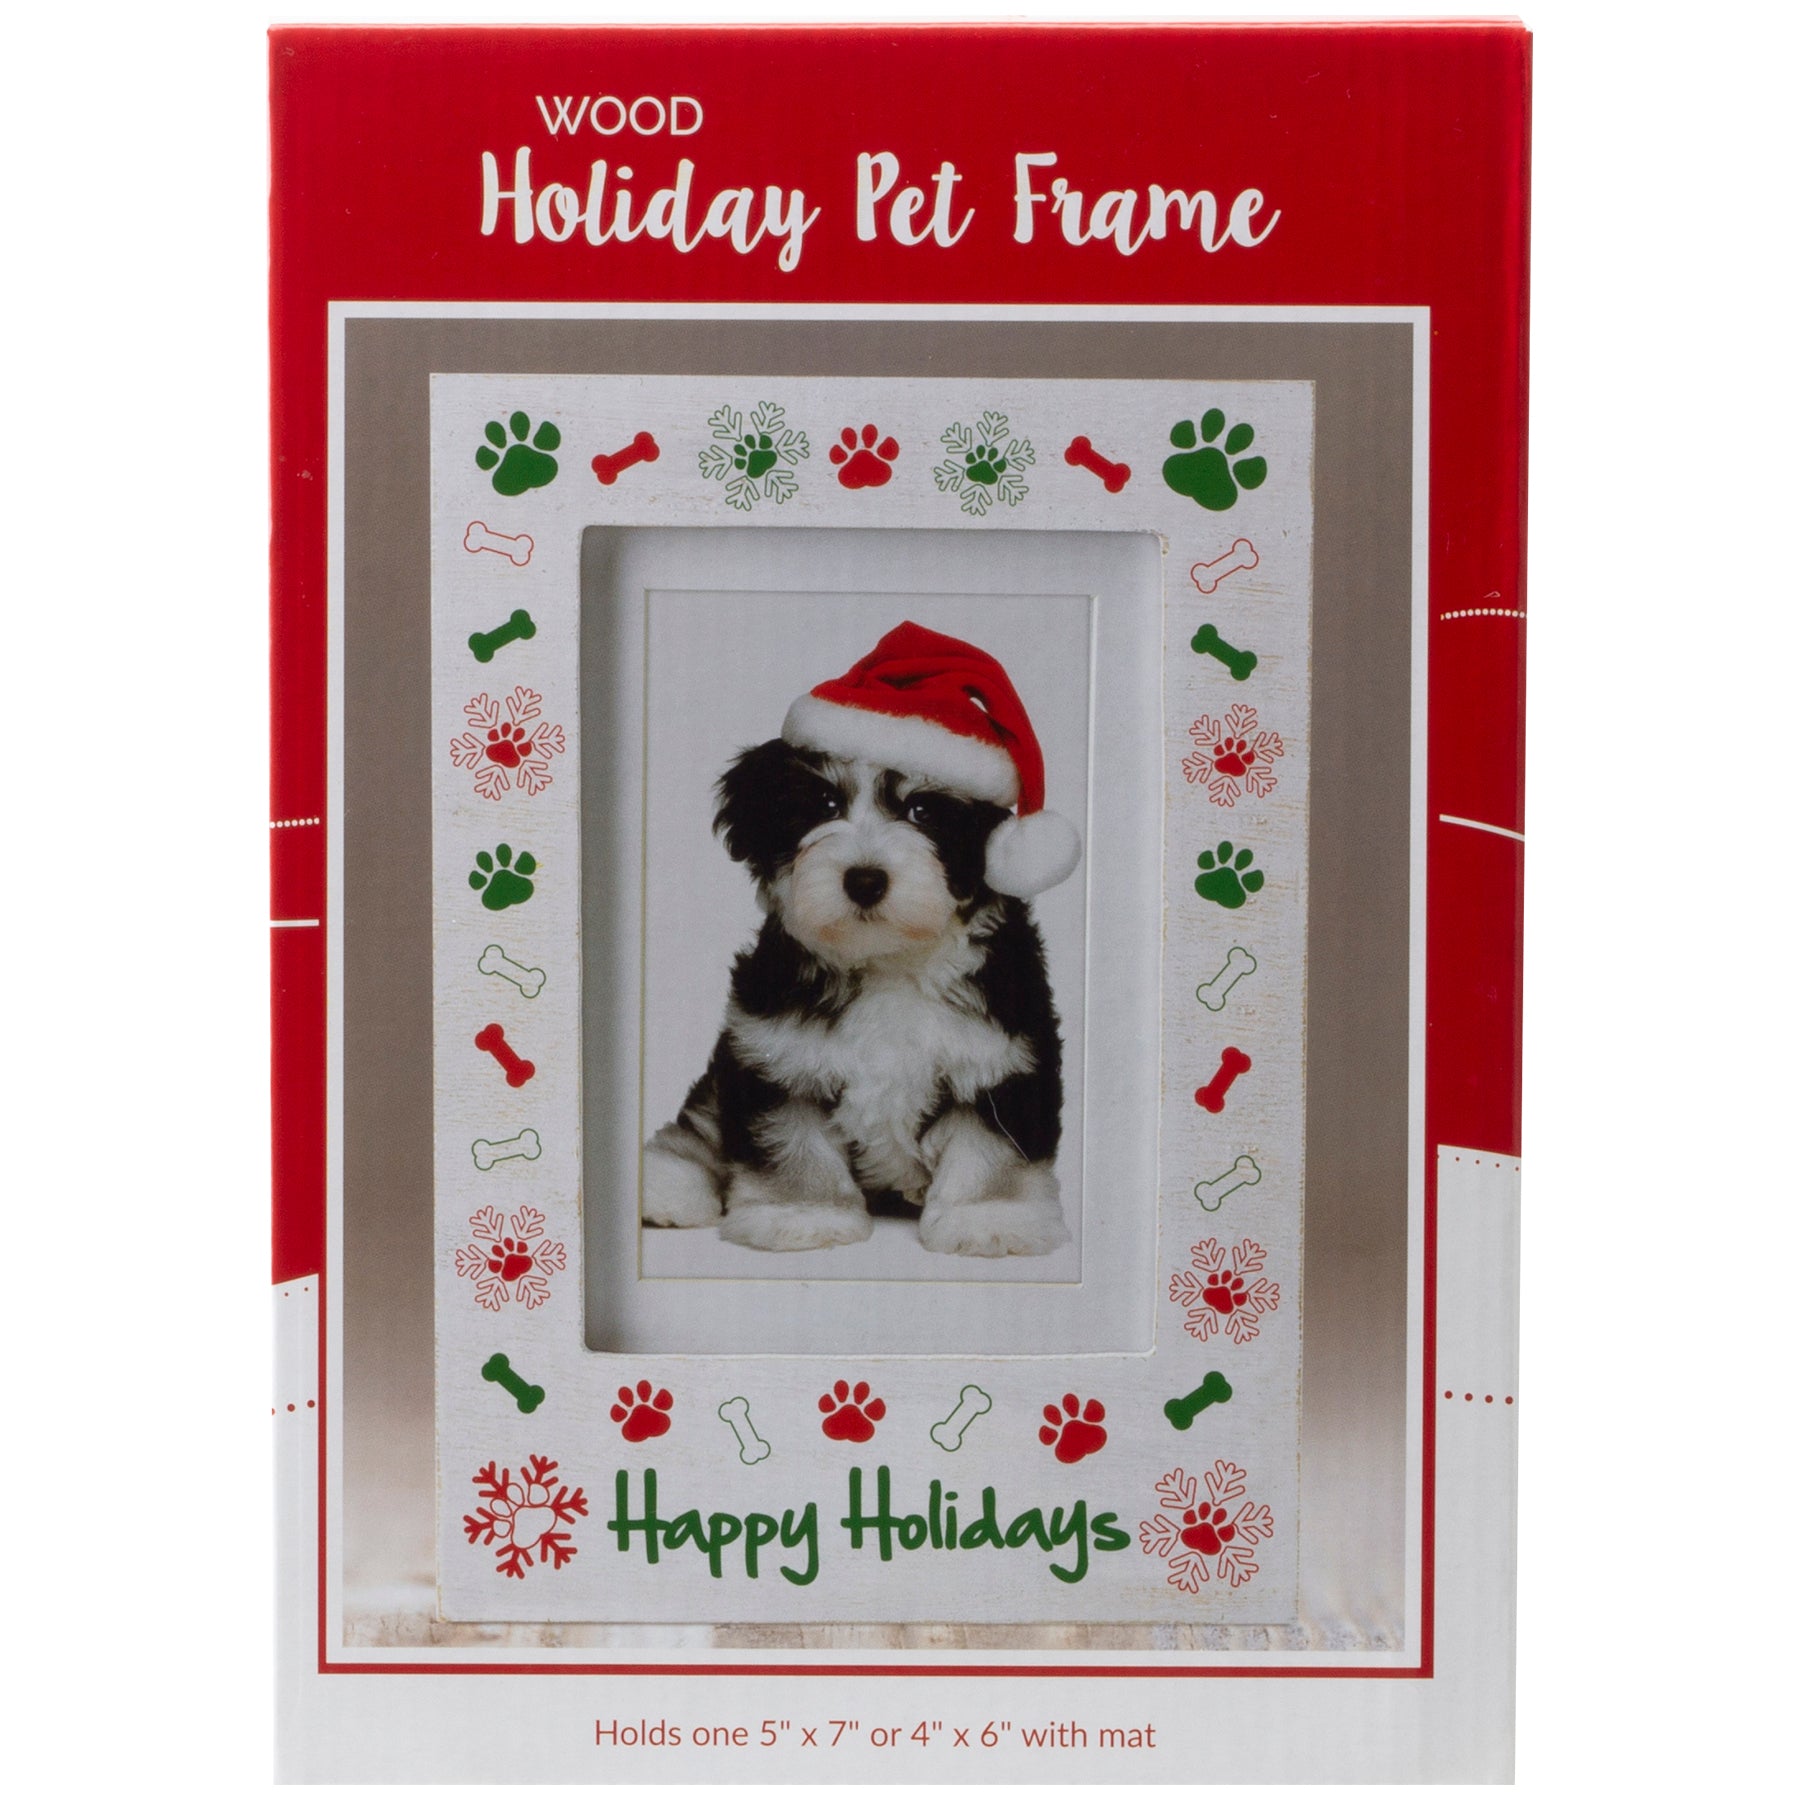 Happy Holidays Pet Picture Frame